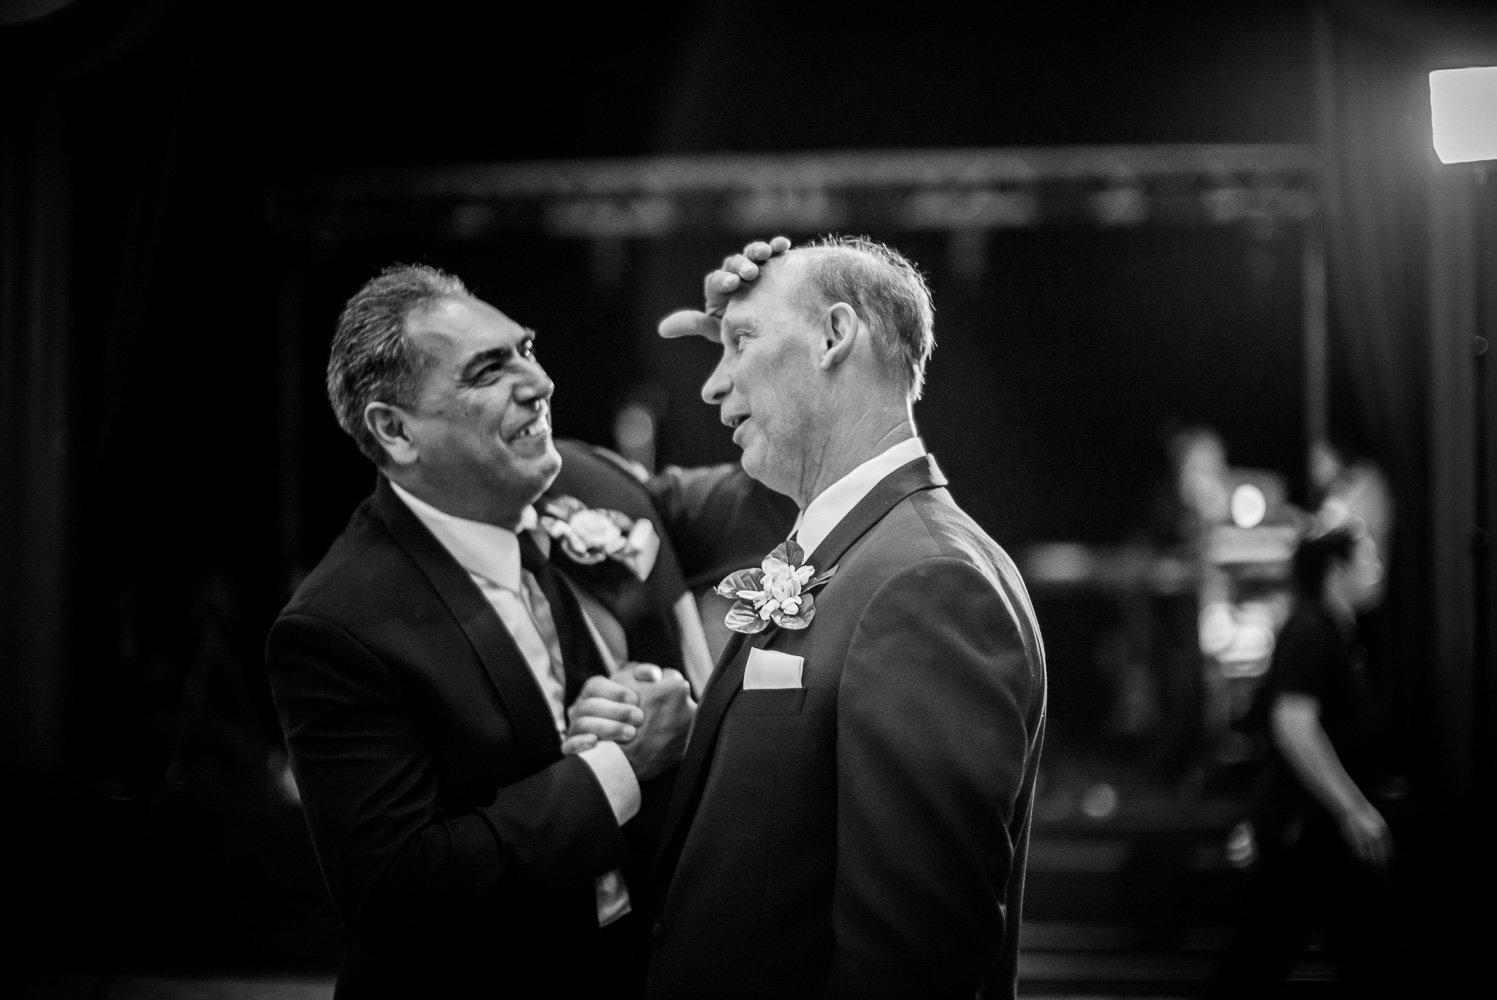 Two fathers share a light hearted moment during speeches St. Anthony Hotel San Antonio Wedding Reception-42